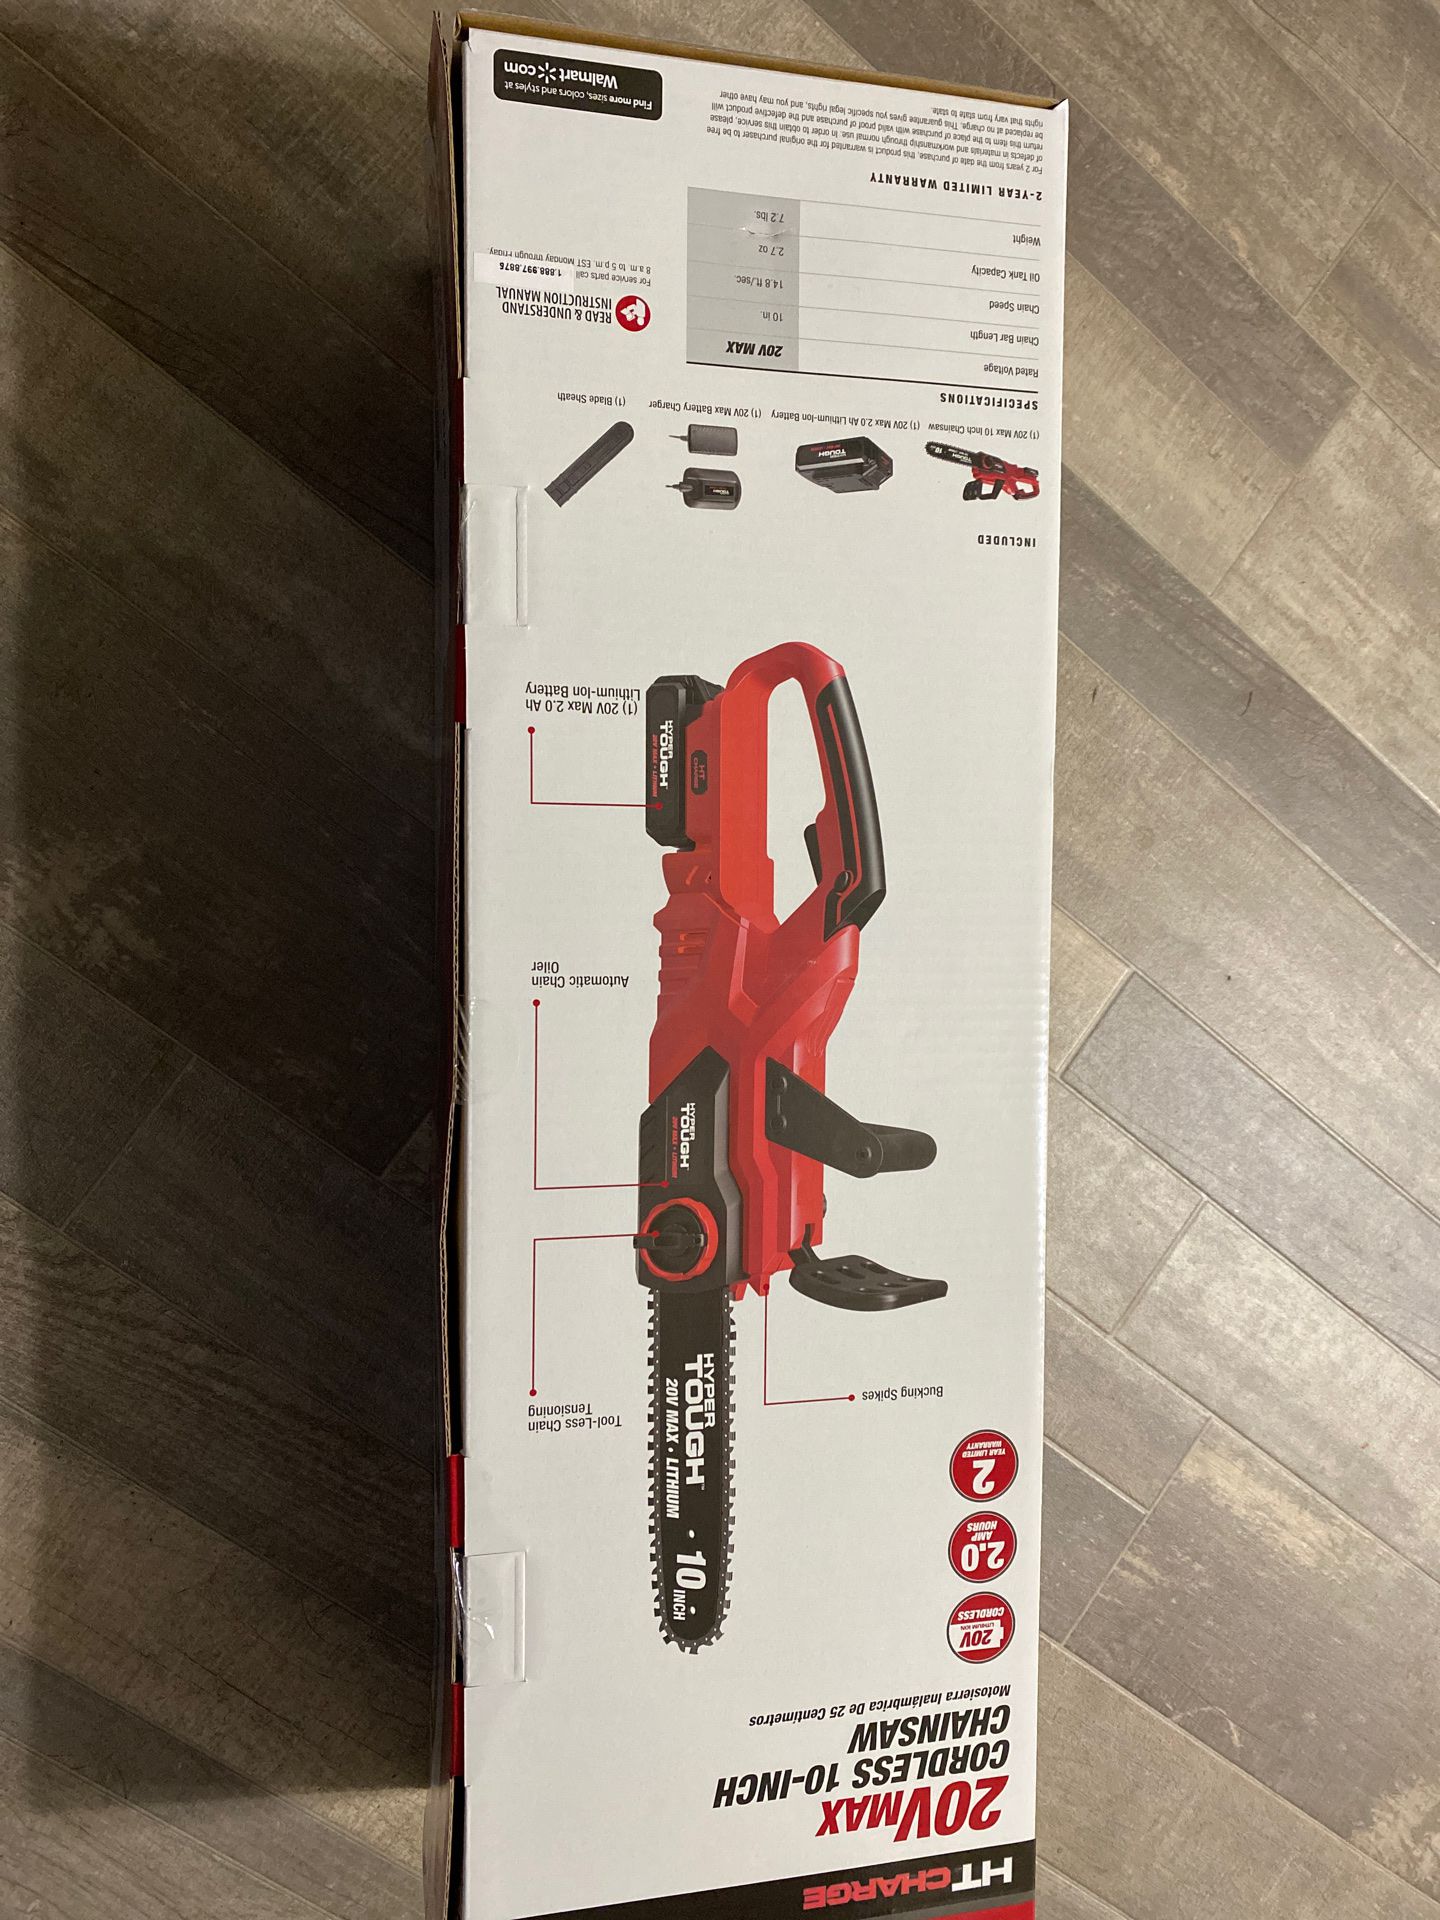 Hyper tough 20volts chainsaw brand new never used